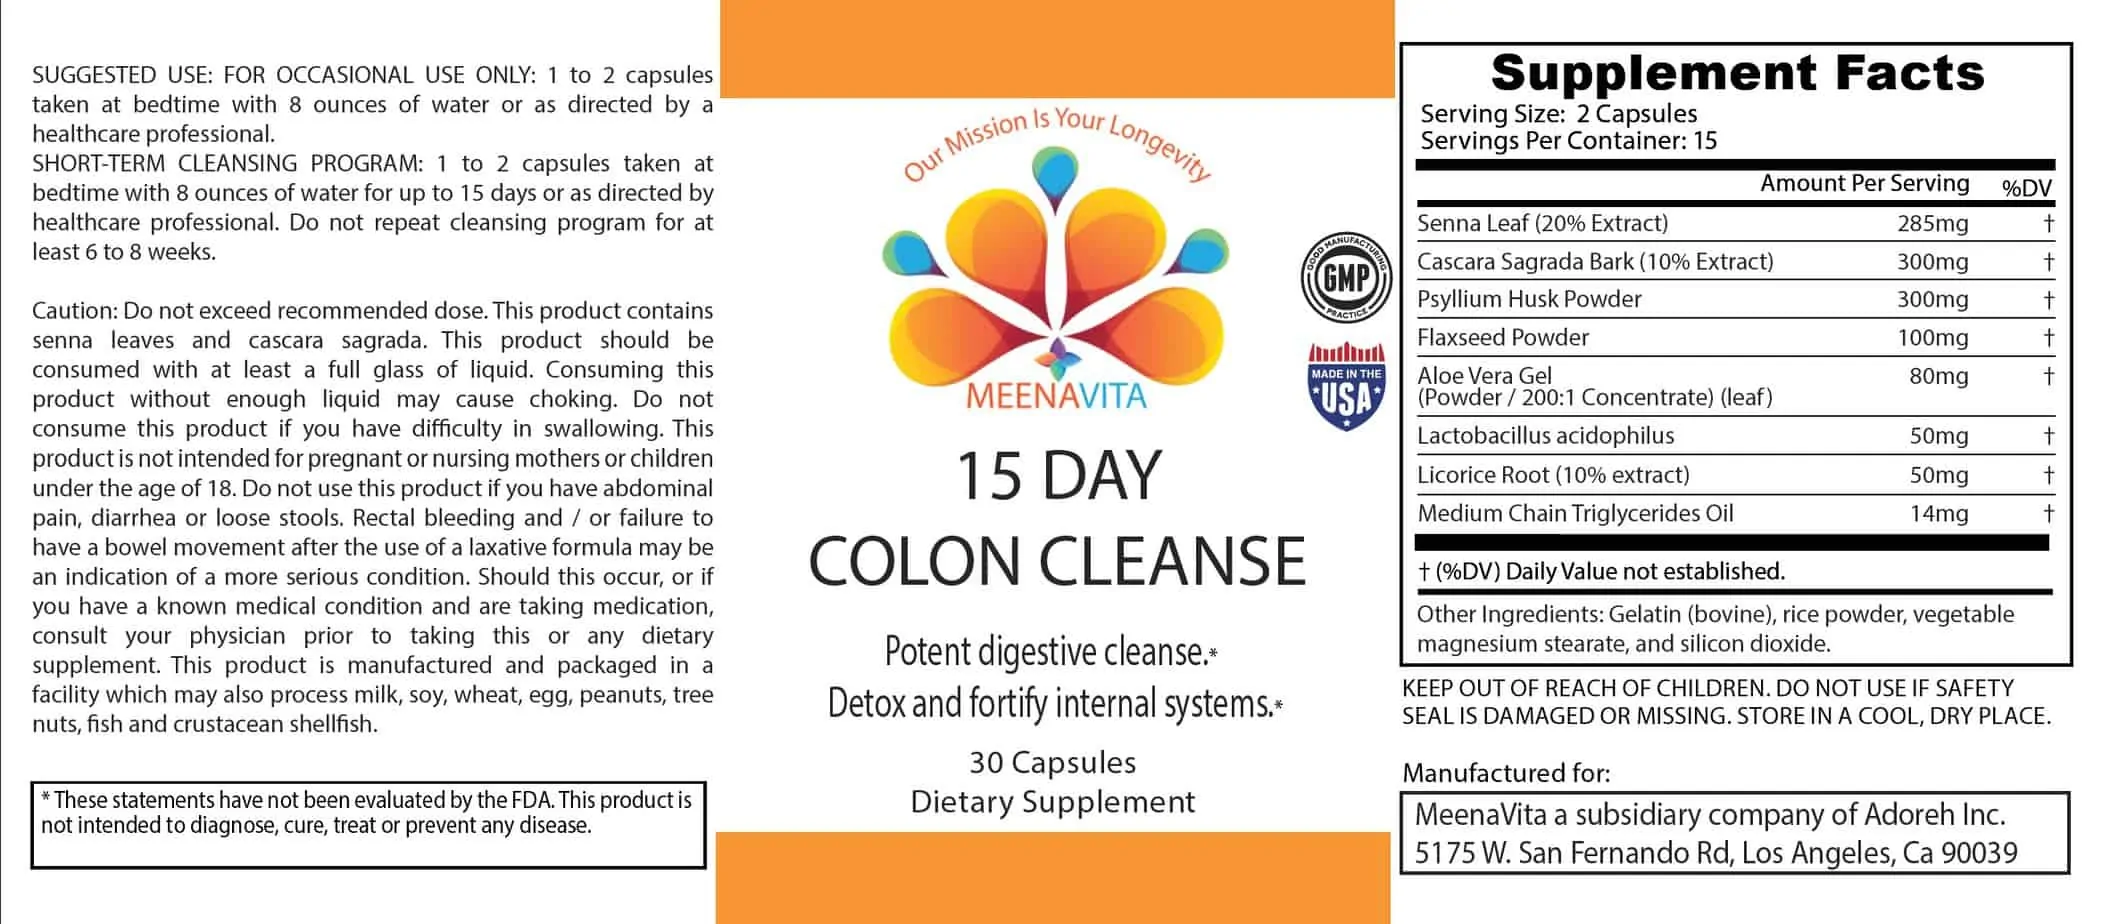 Colon Cleanse 15 Day